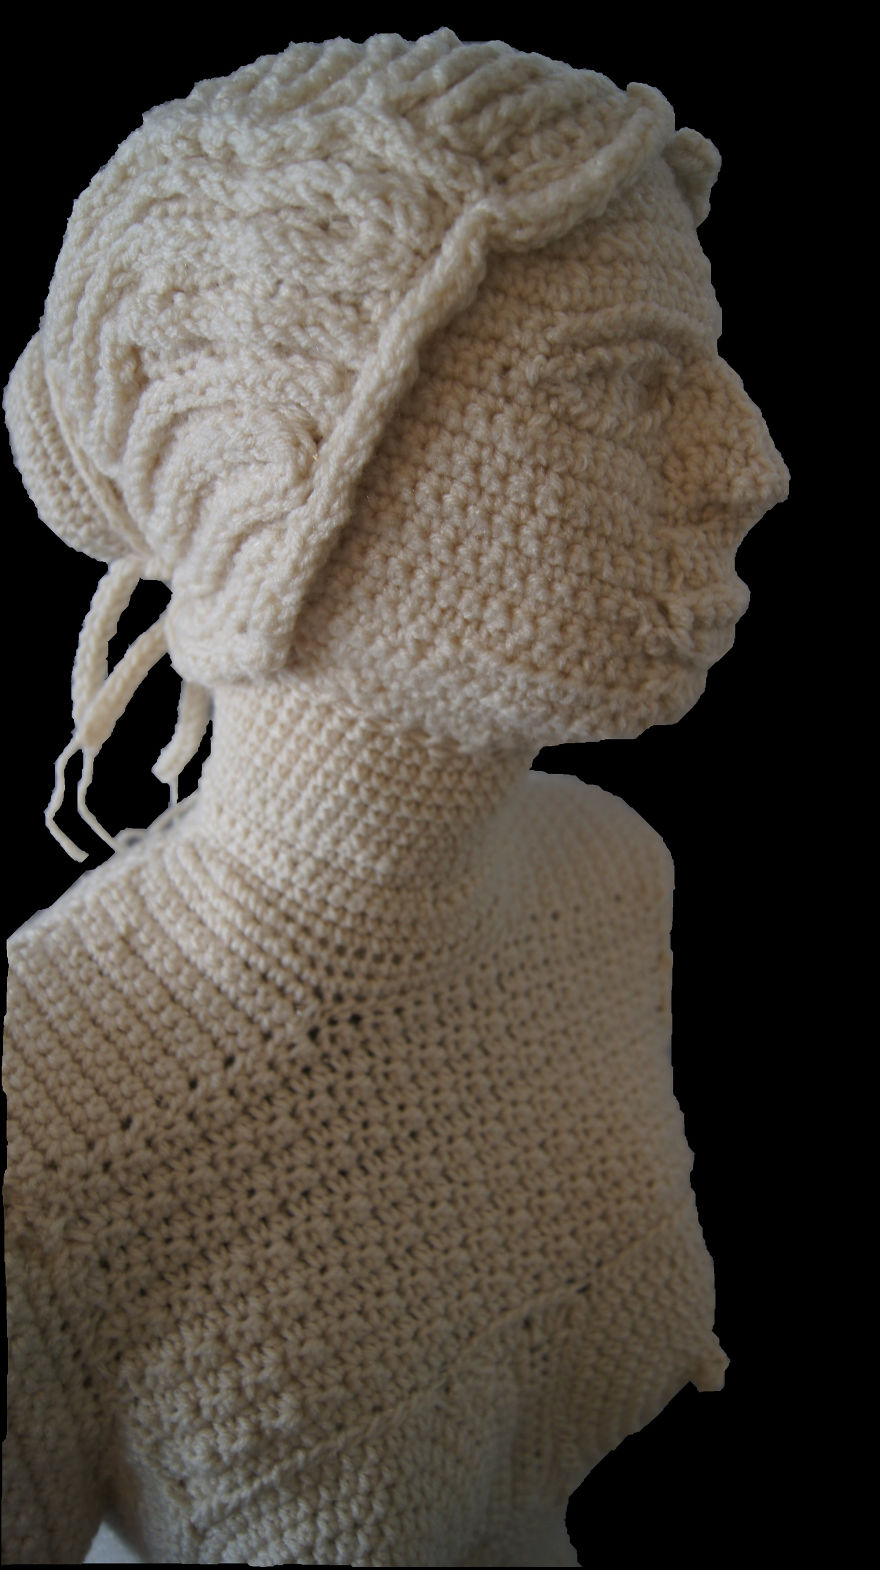 I Make Life-Size Crocheted Sculptures With Elements Of Realism